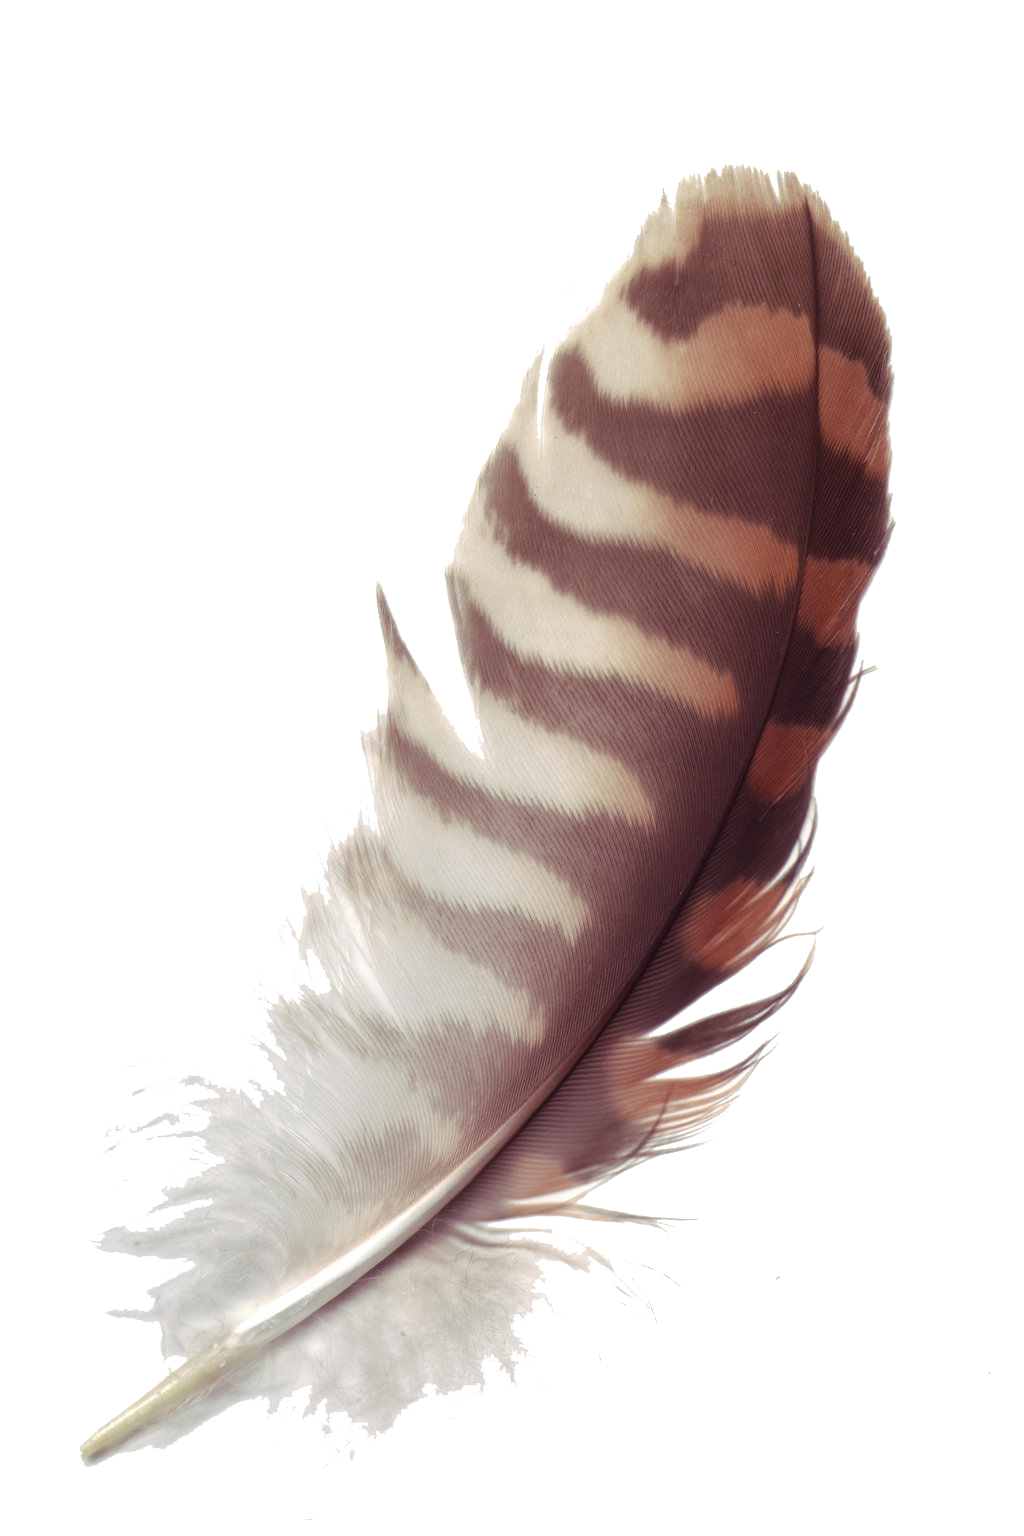 Feather PNG Clipart